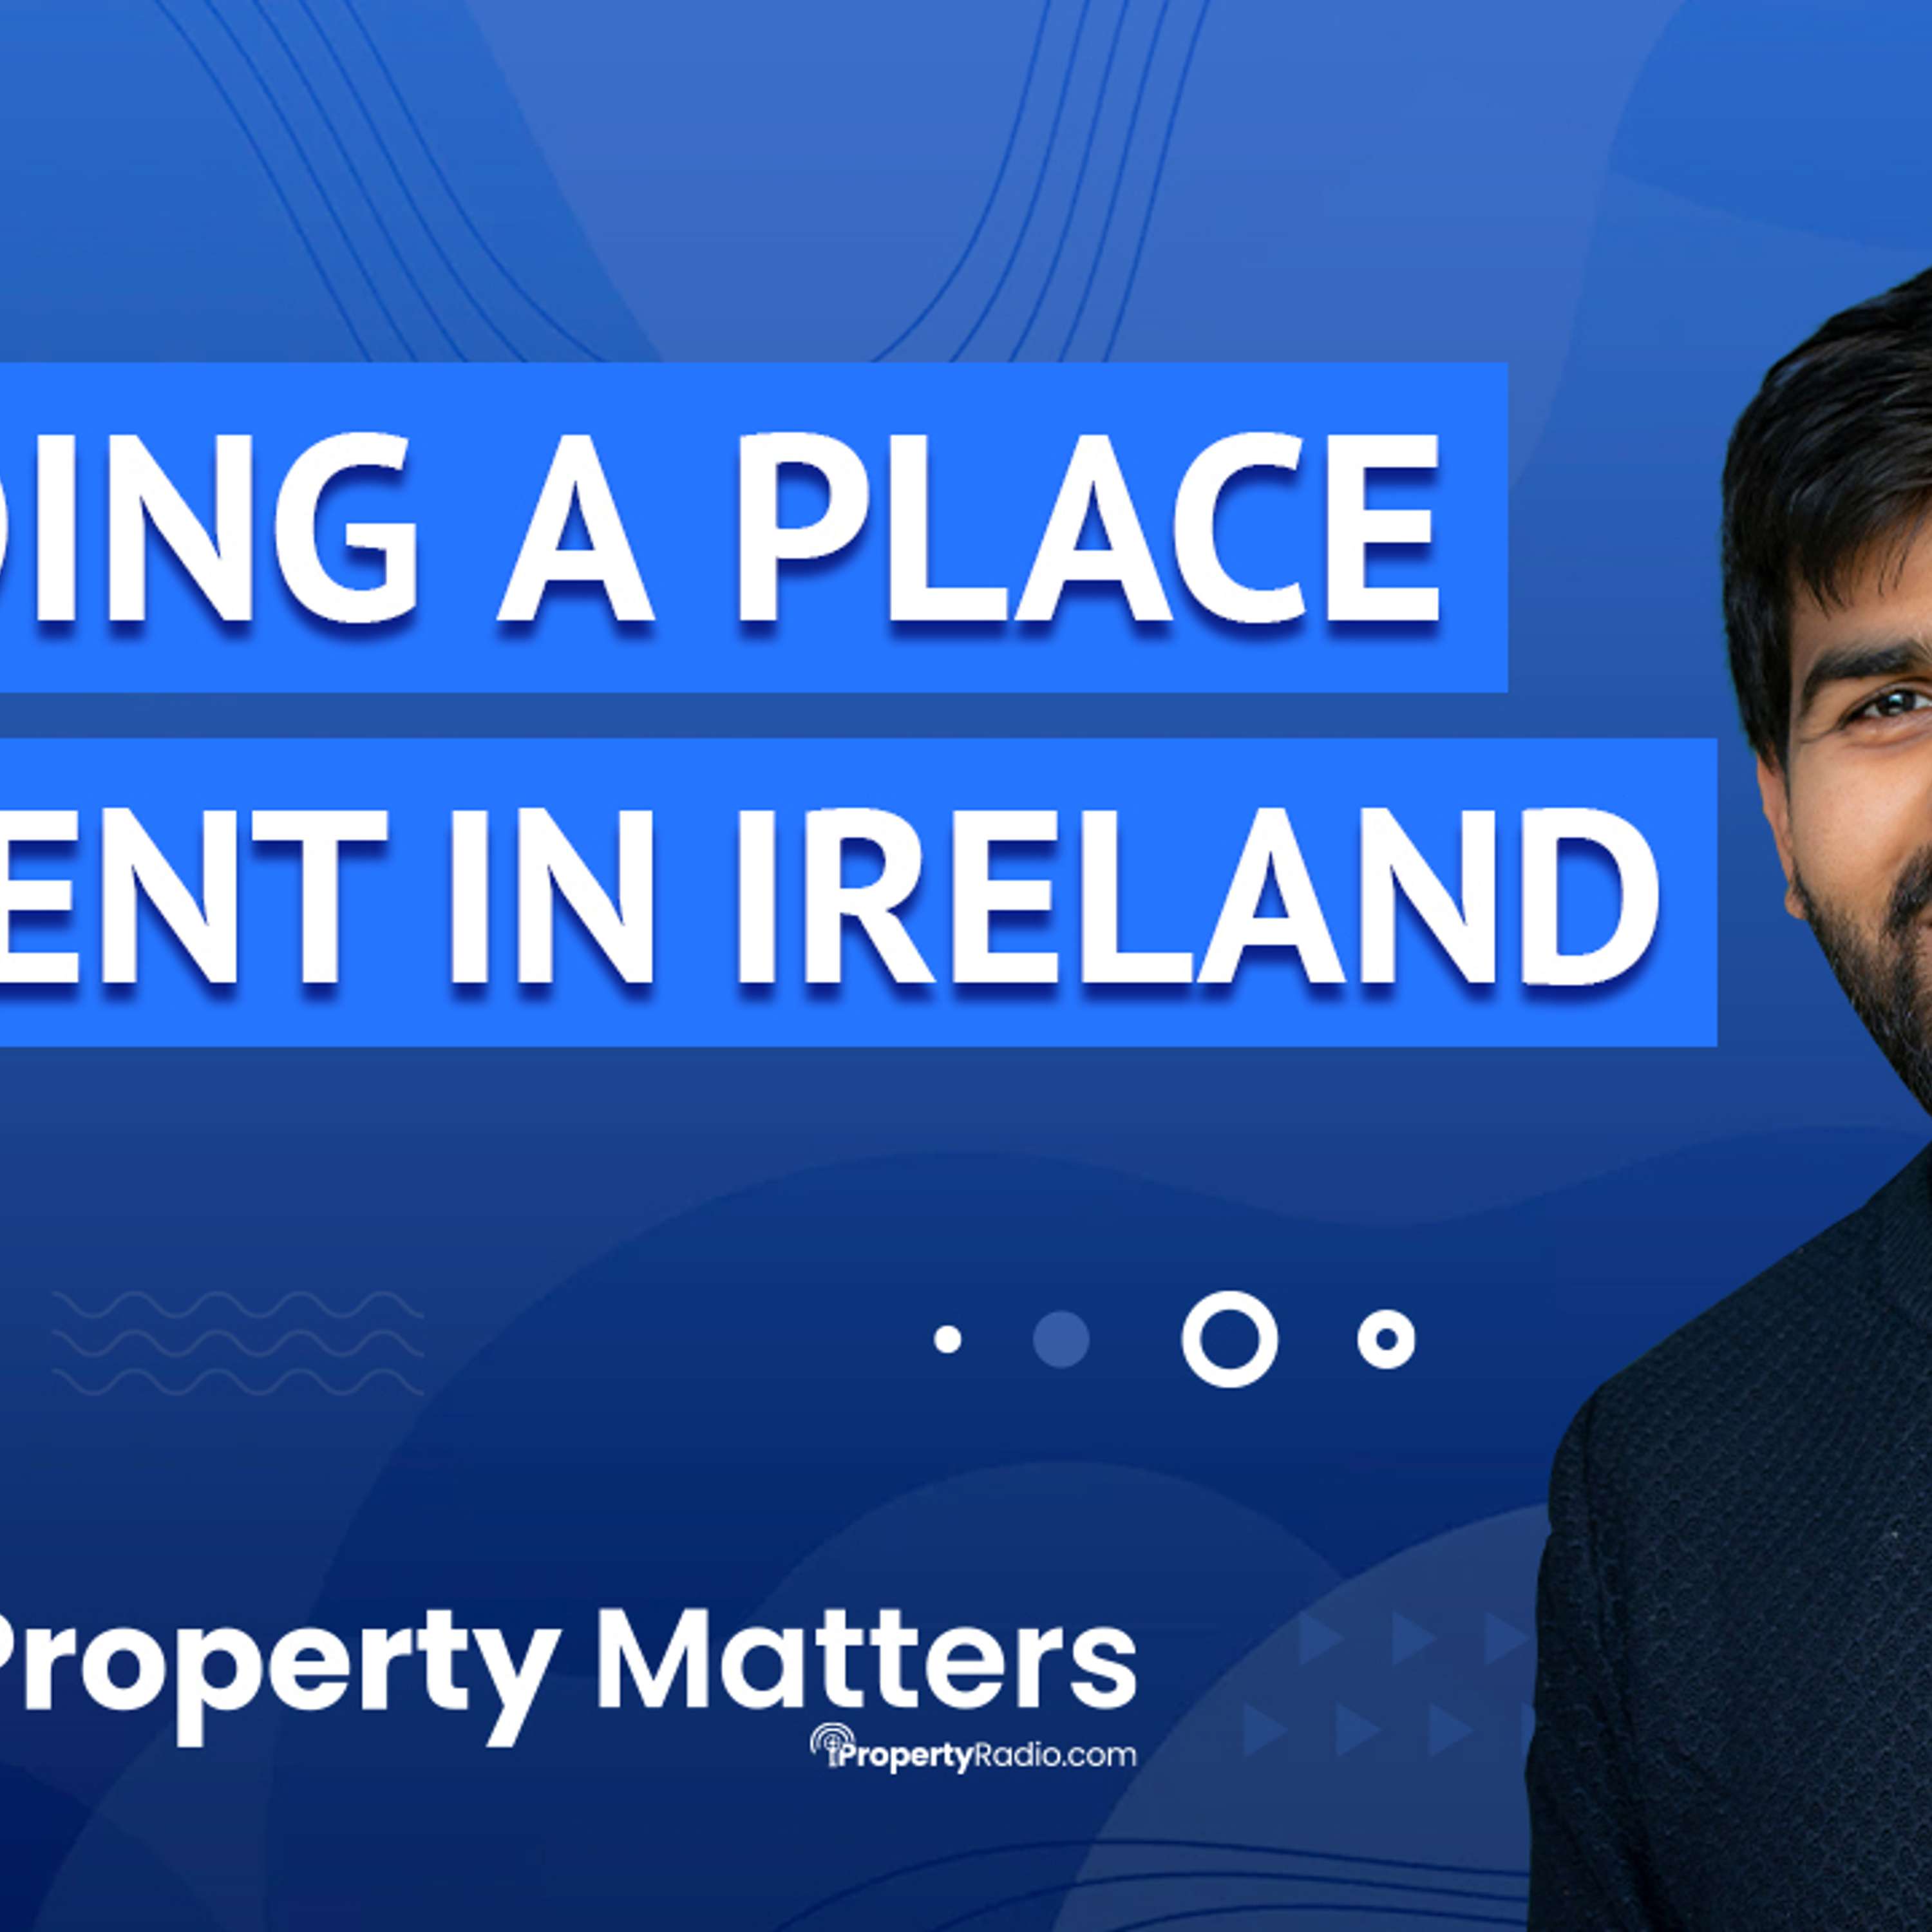 Process we followed to find a house to rent - Rajat Sabulal SEO Specialist at Wolfgang Digital